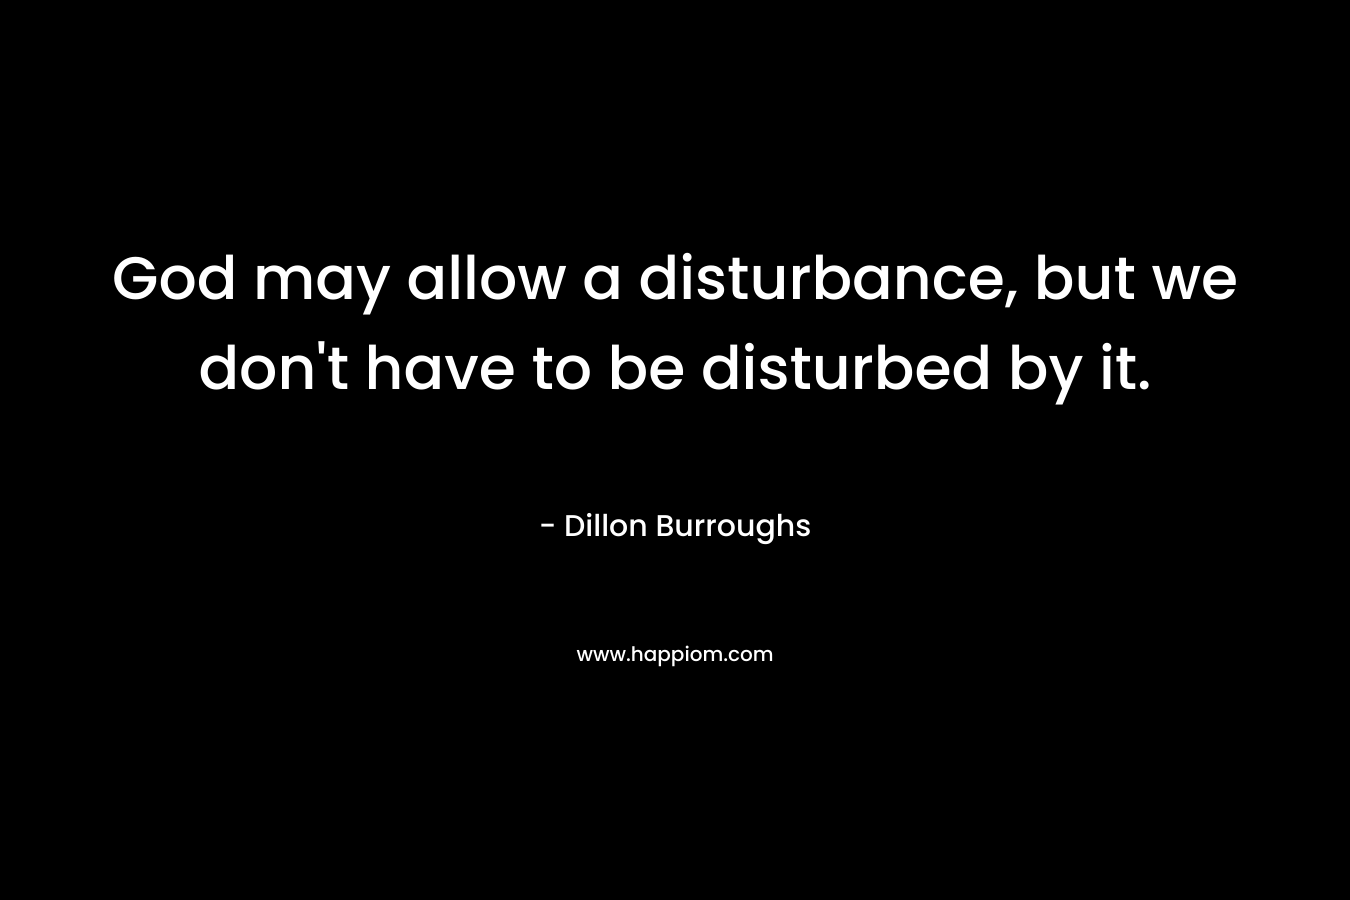 God may allow a disturbance, but we don't have to be disturbed by it.